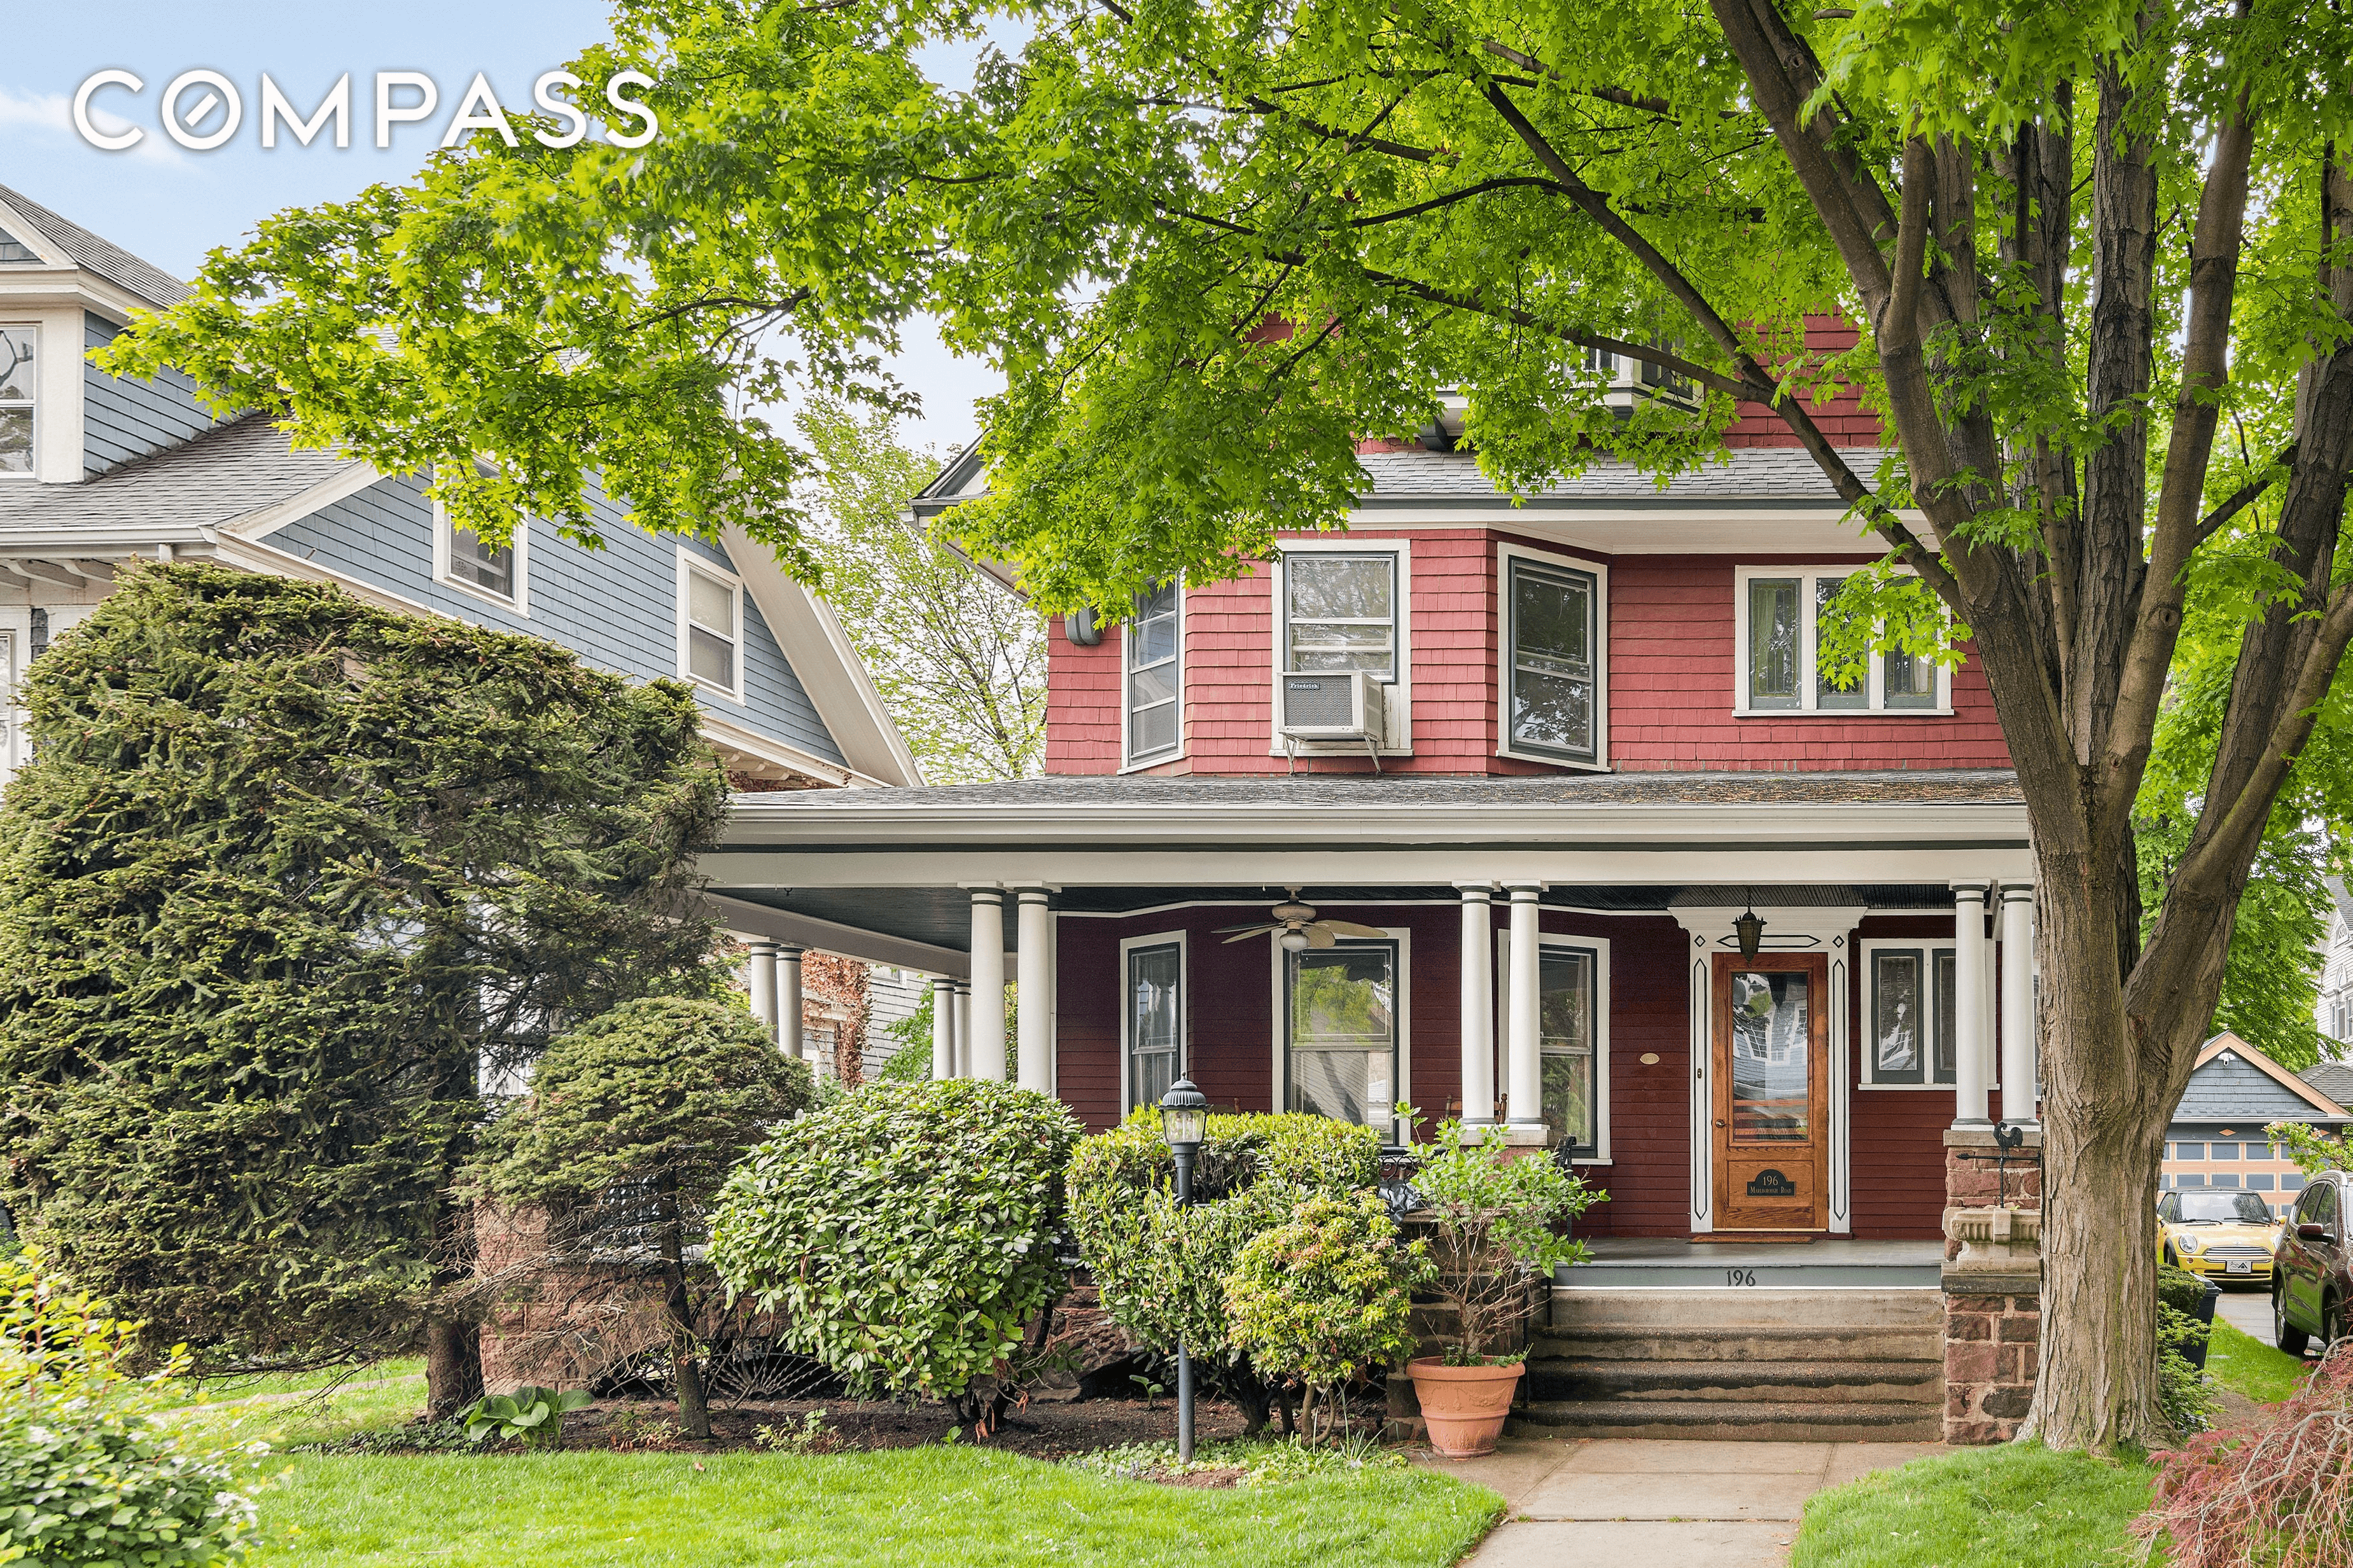 exterior of red shingled house with porch